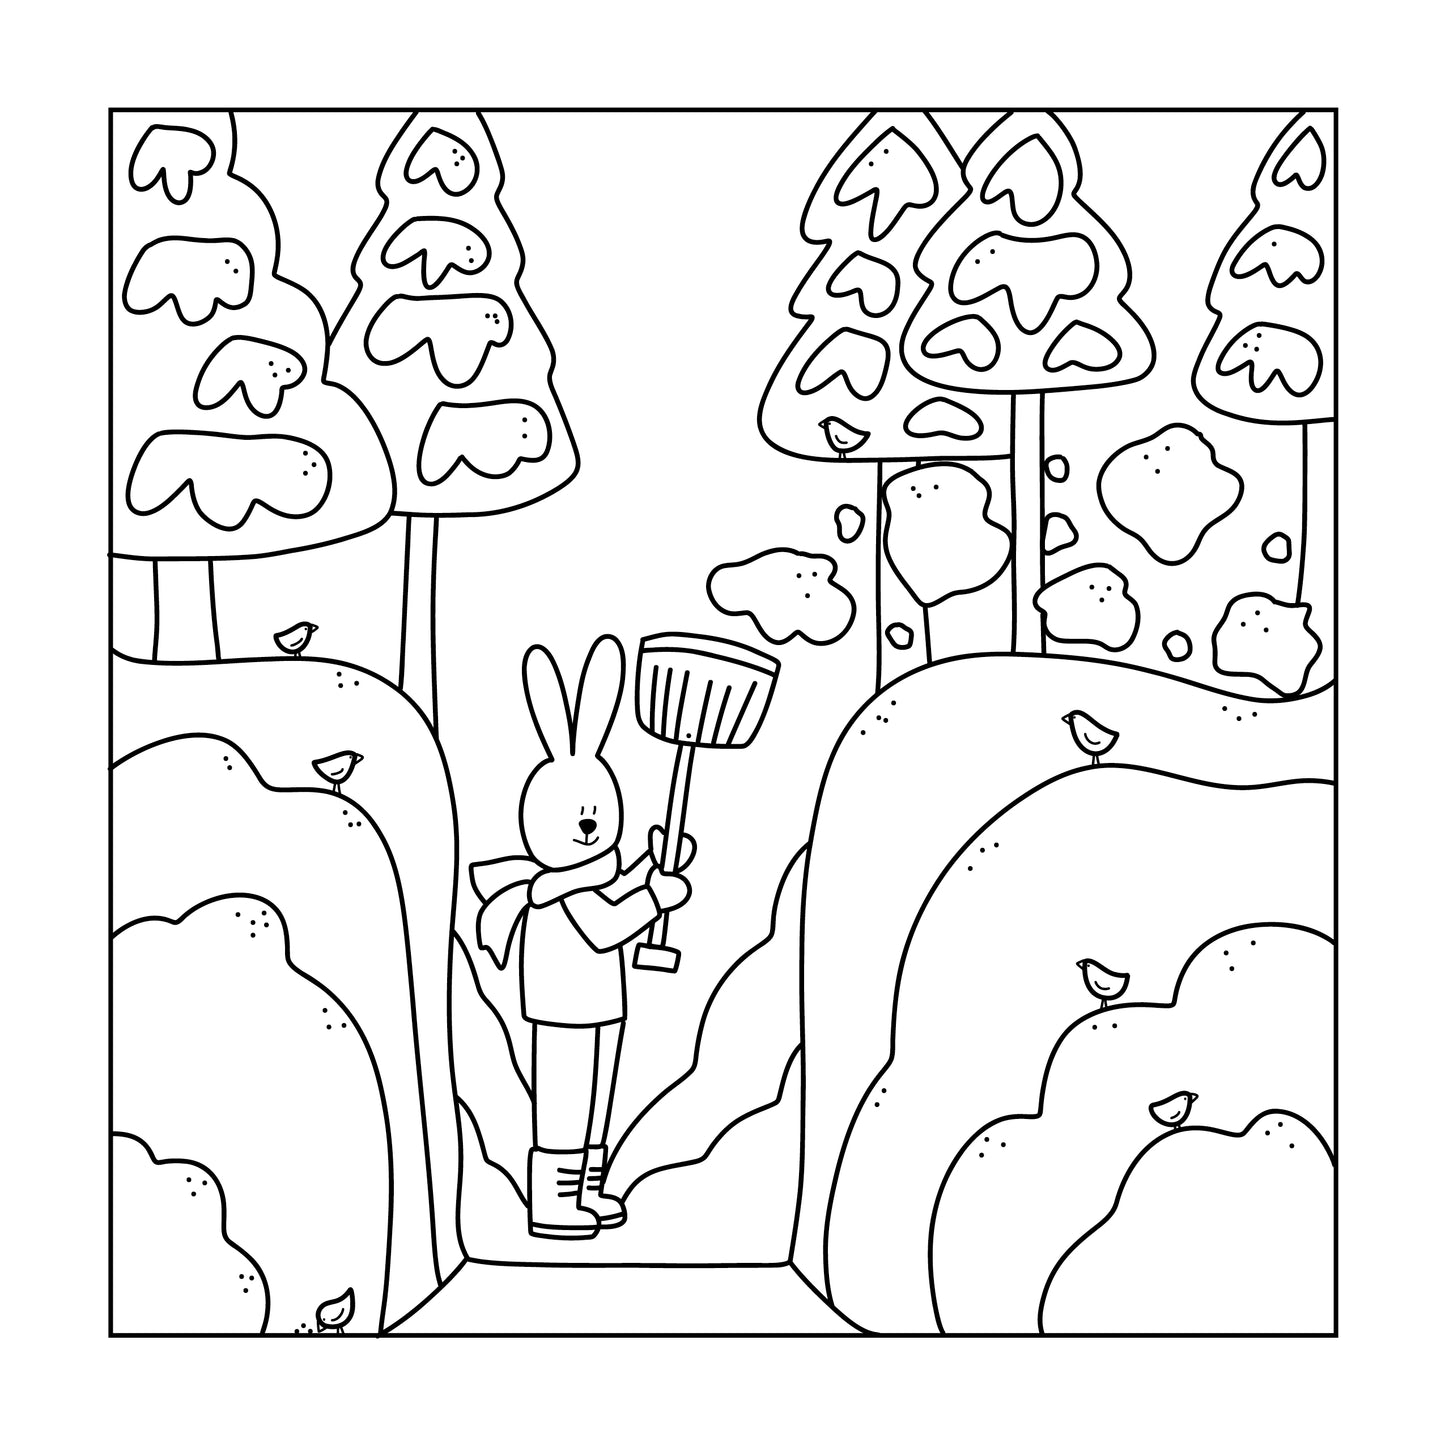 Free Coloring Pages The Dogwoods & The Big Storm